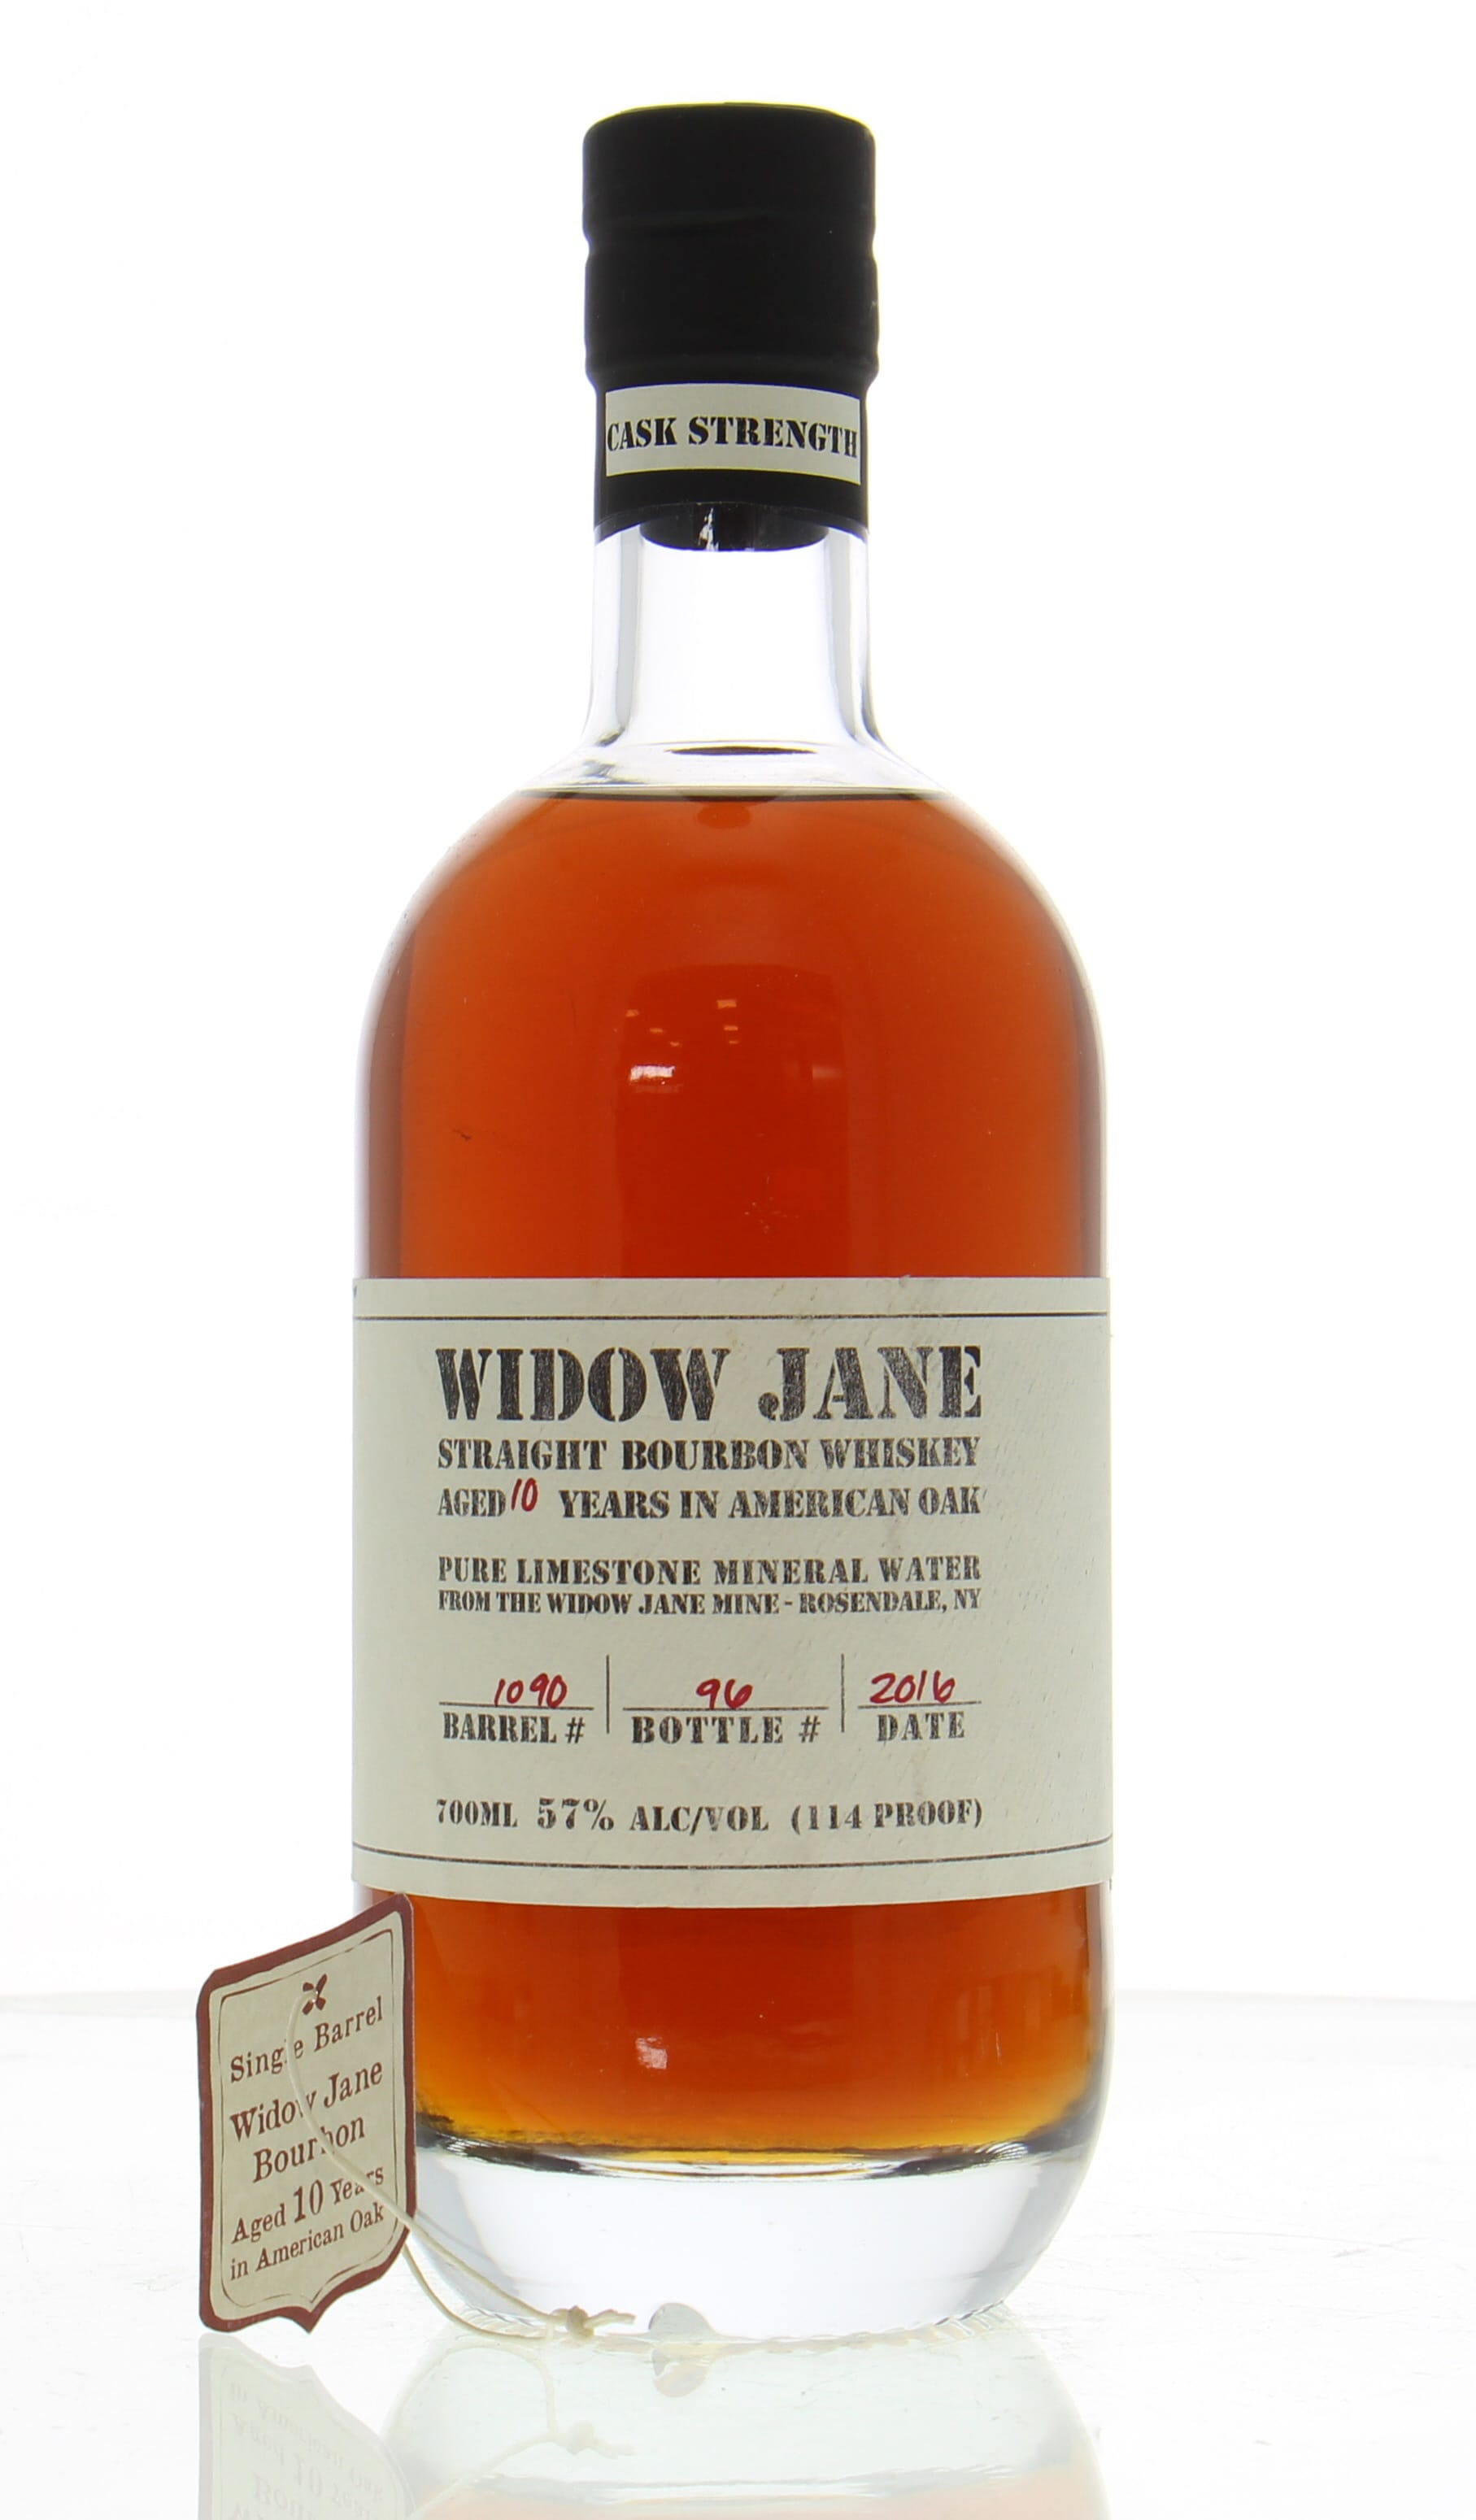 Widow Jane Distillery - 10 Years Old Cask:1090 Bottled for 60th Anniversary of La Maison du Whisky 57.1% NV Perfect